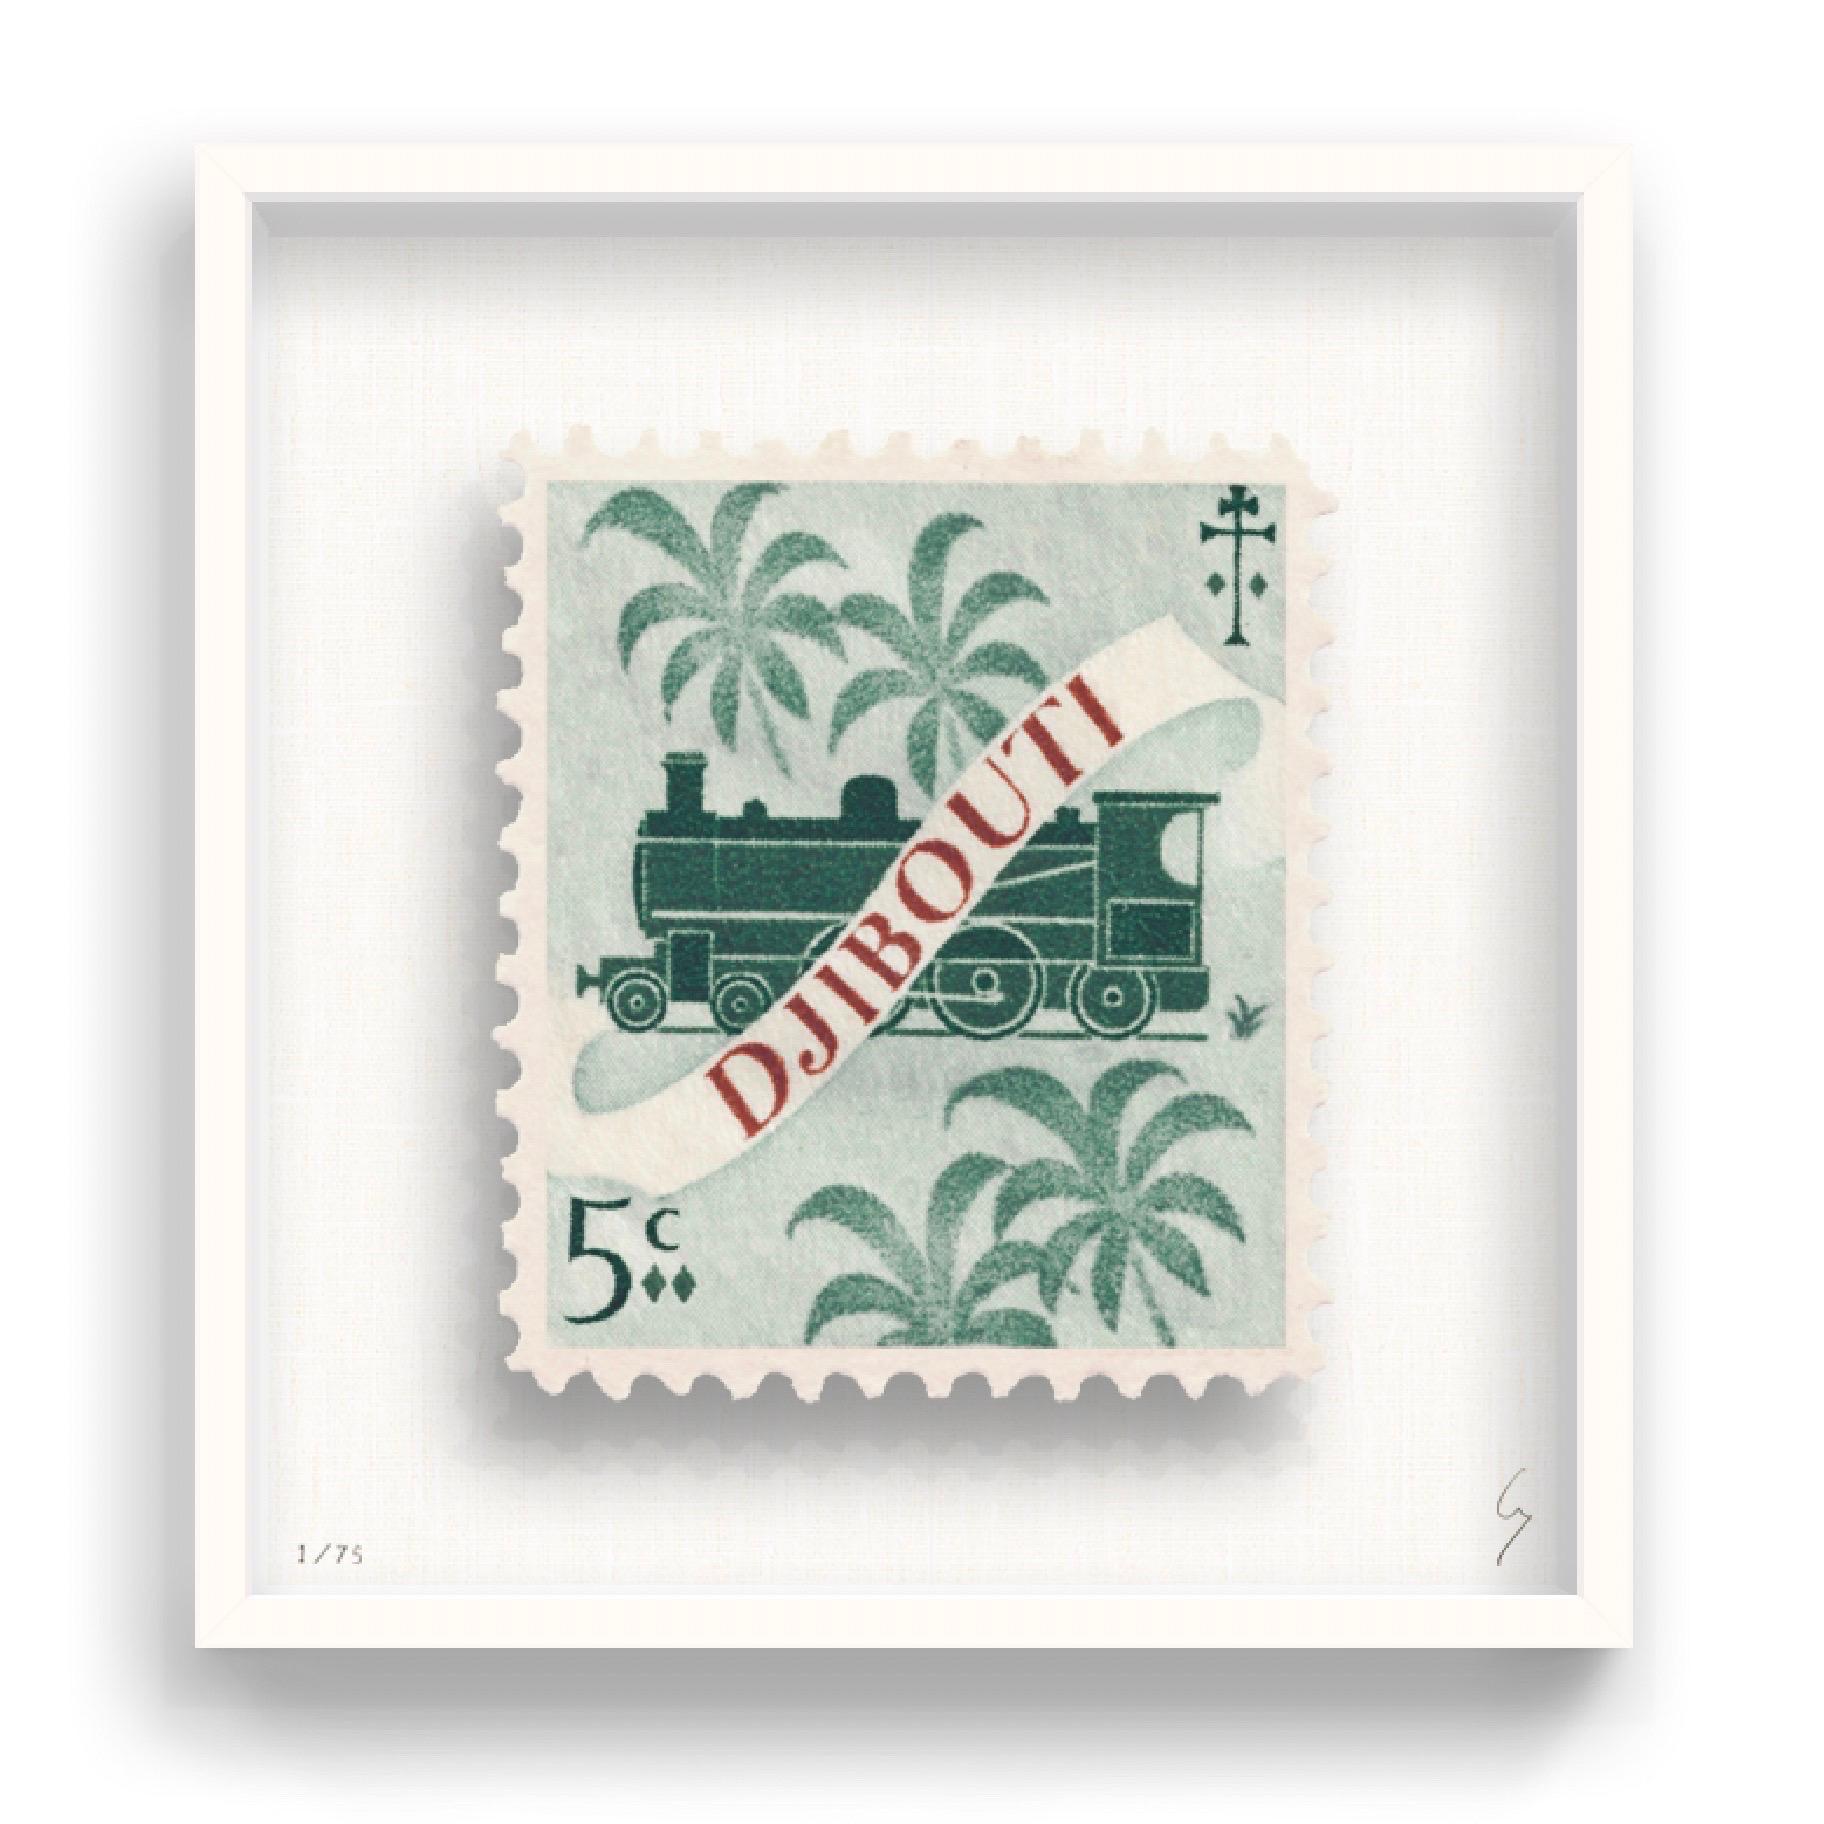 Guy Gee, Djibouti (medium)

Hand-engraved print on 350gsm on G.F Smith card
53 x 56cm (20 4/5 x 22 2/5 in)
Frame included 
Edition of 75 

Each artwork by Guy had been digitally reimagined from an original postage stamp. Cut out and finished by